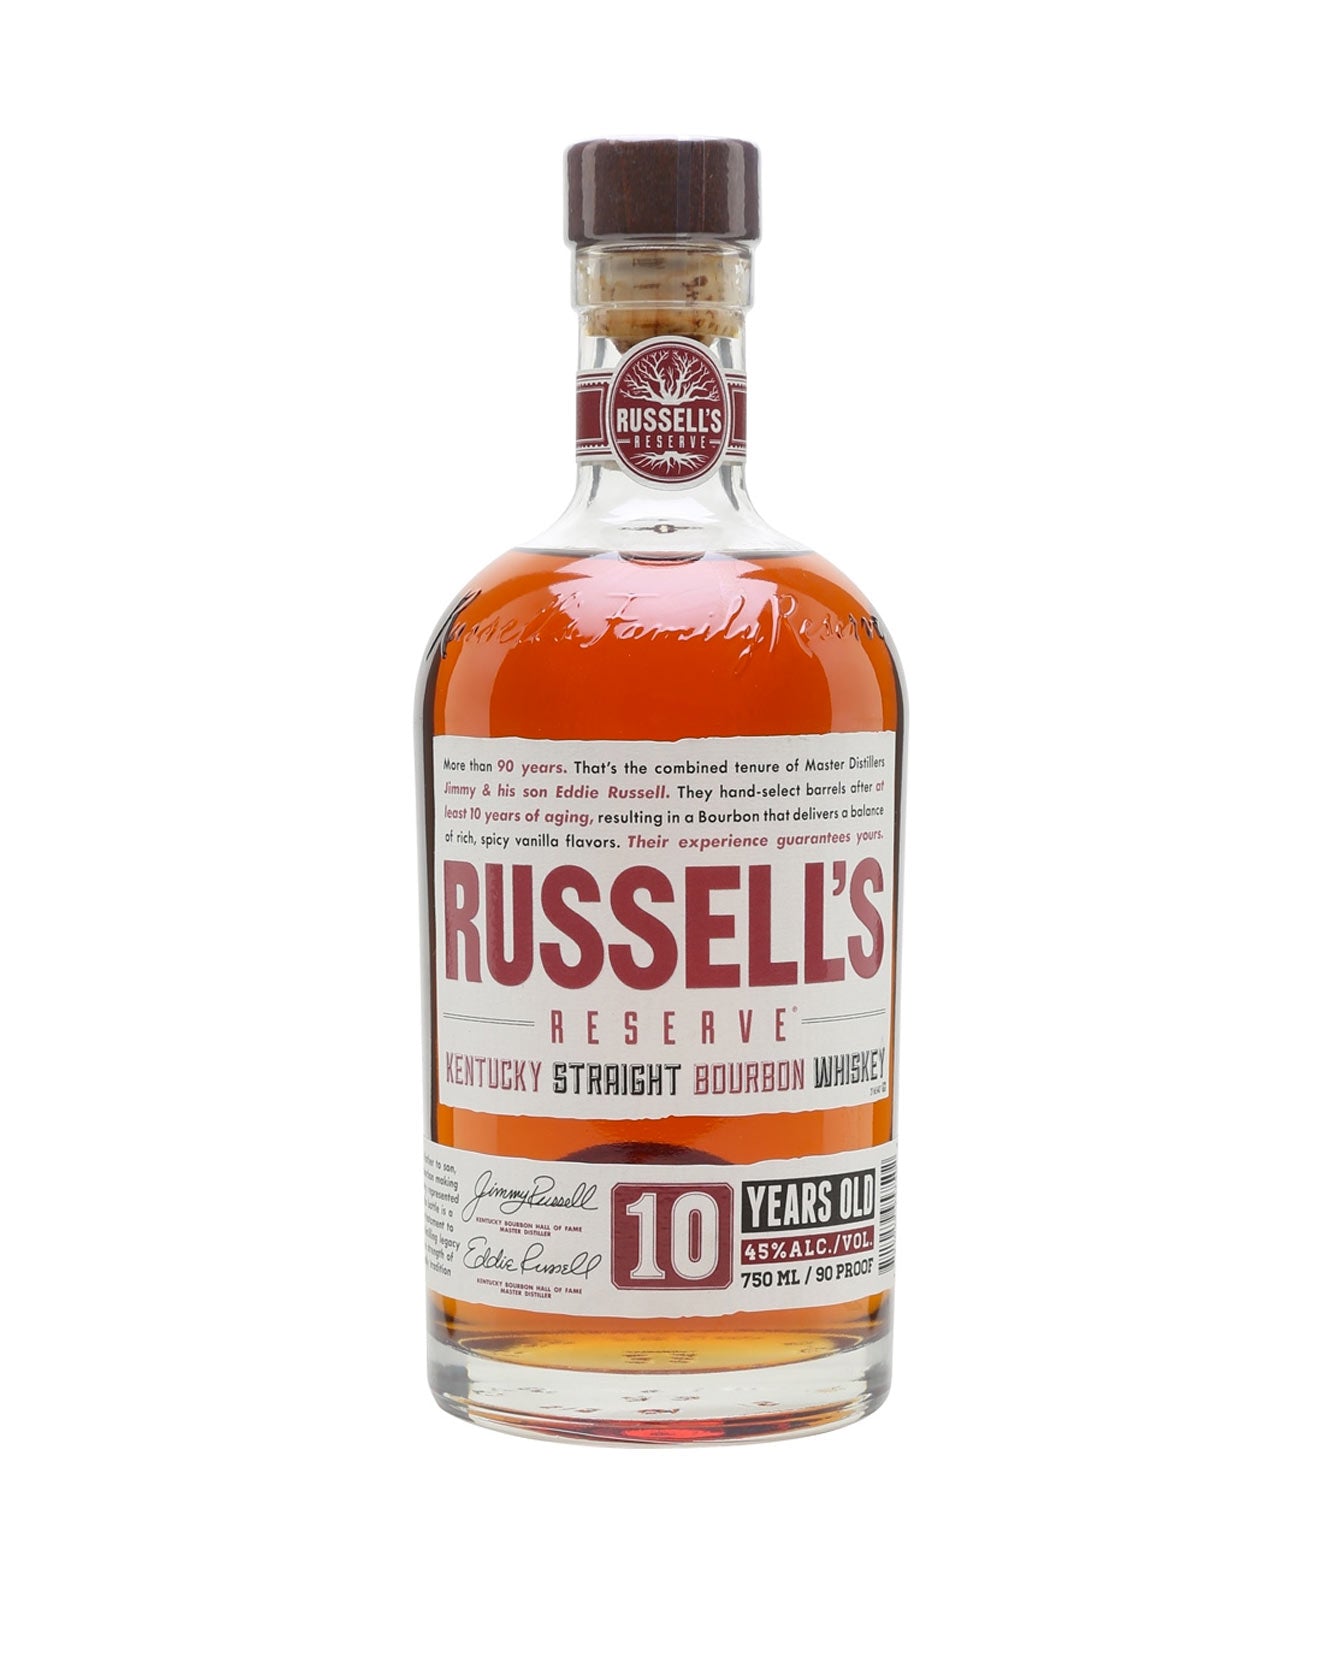 Wild Turkey Russell's Reserve 10 Year Old